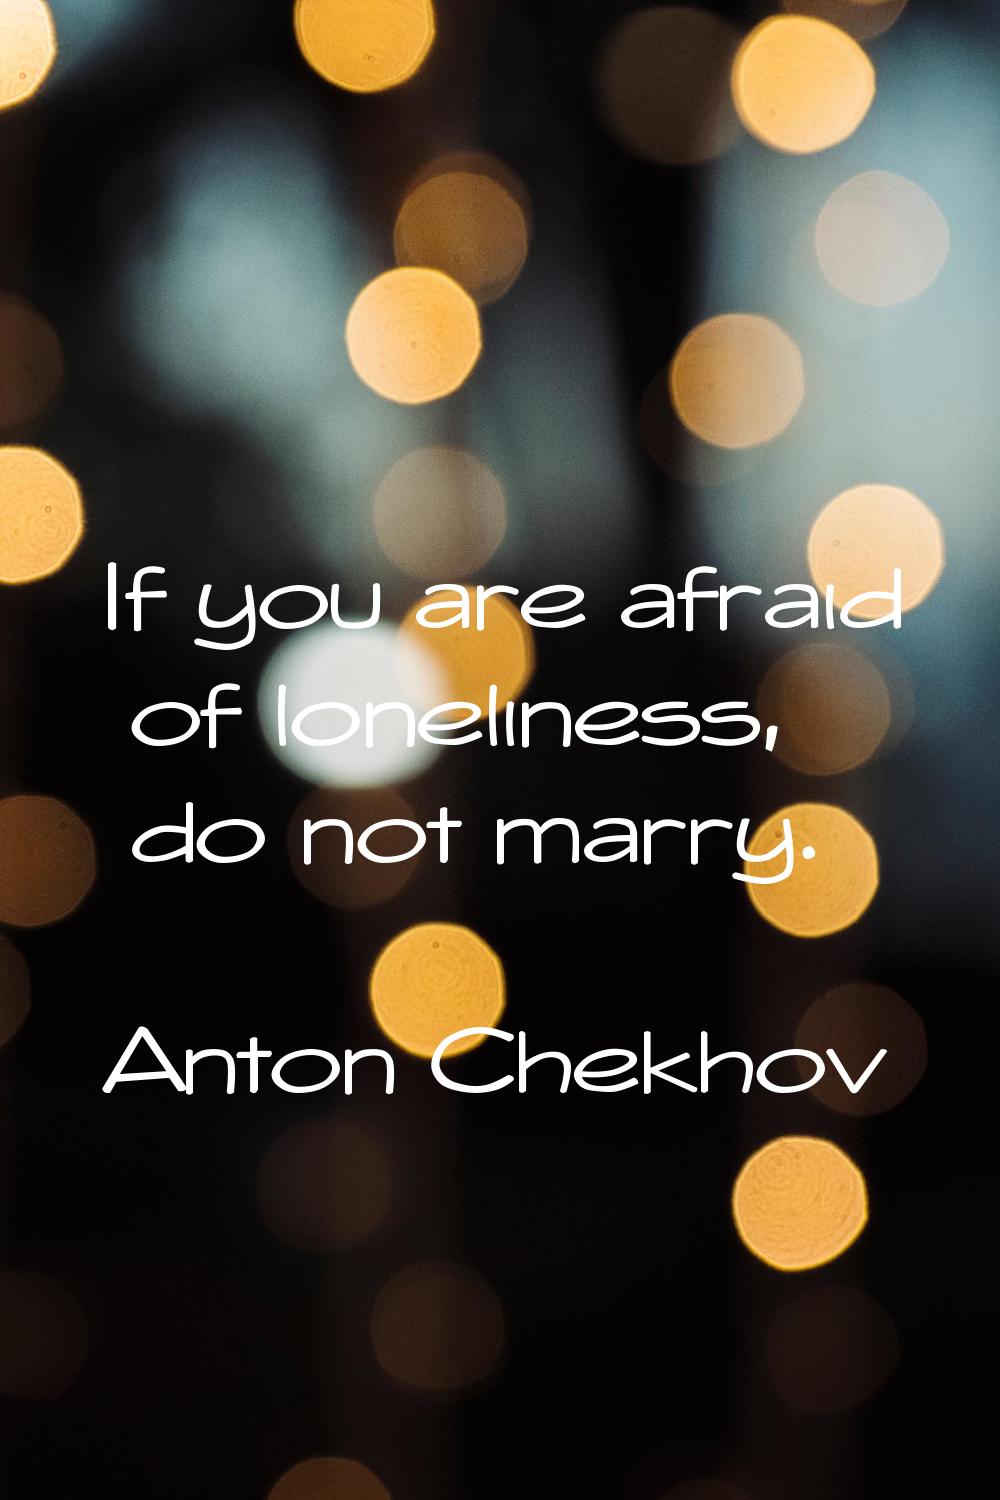 If you are afraid of loneliness, do not marry.